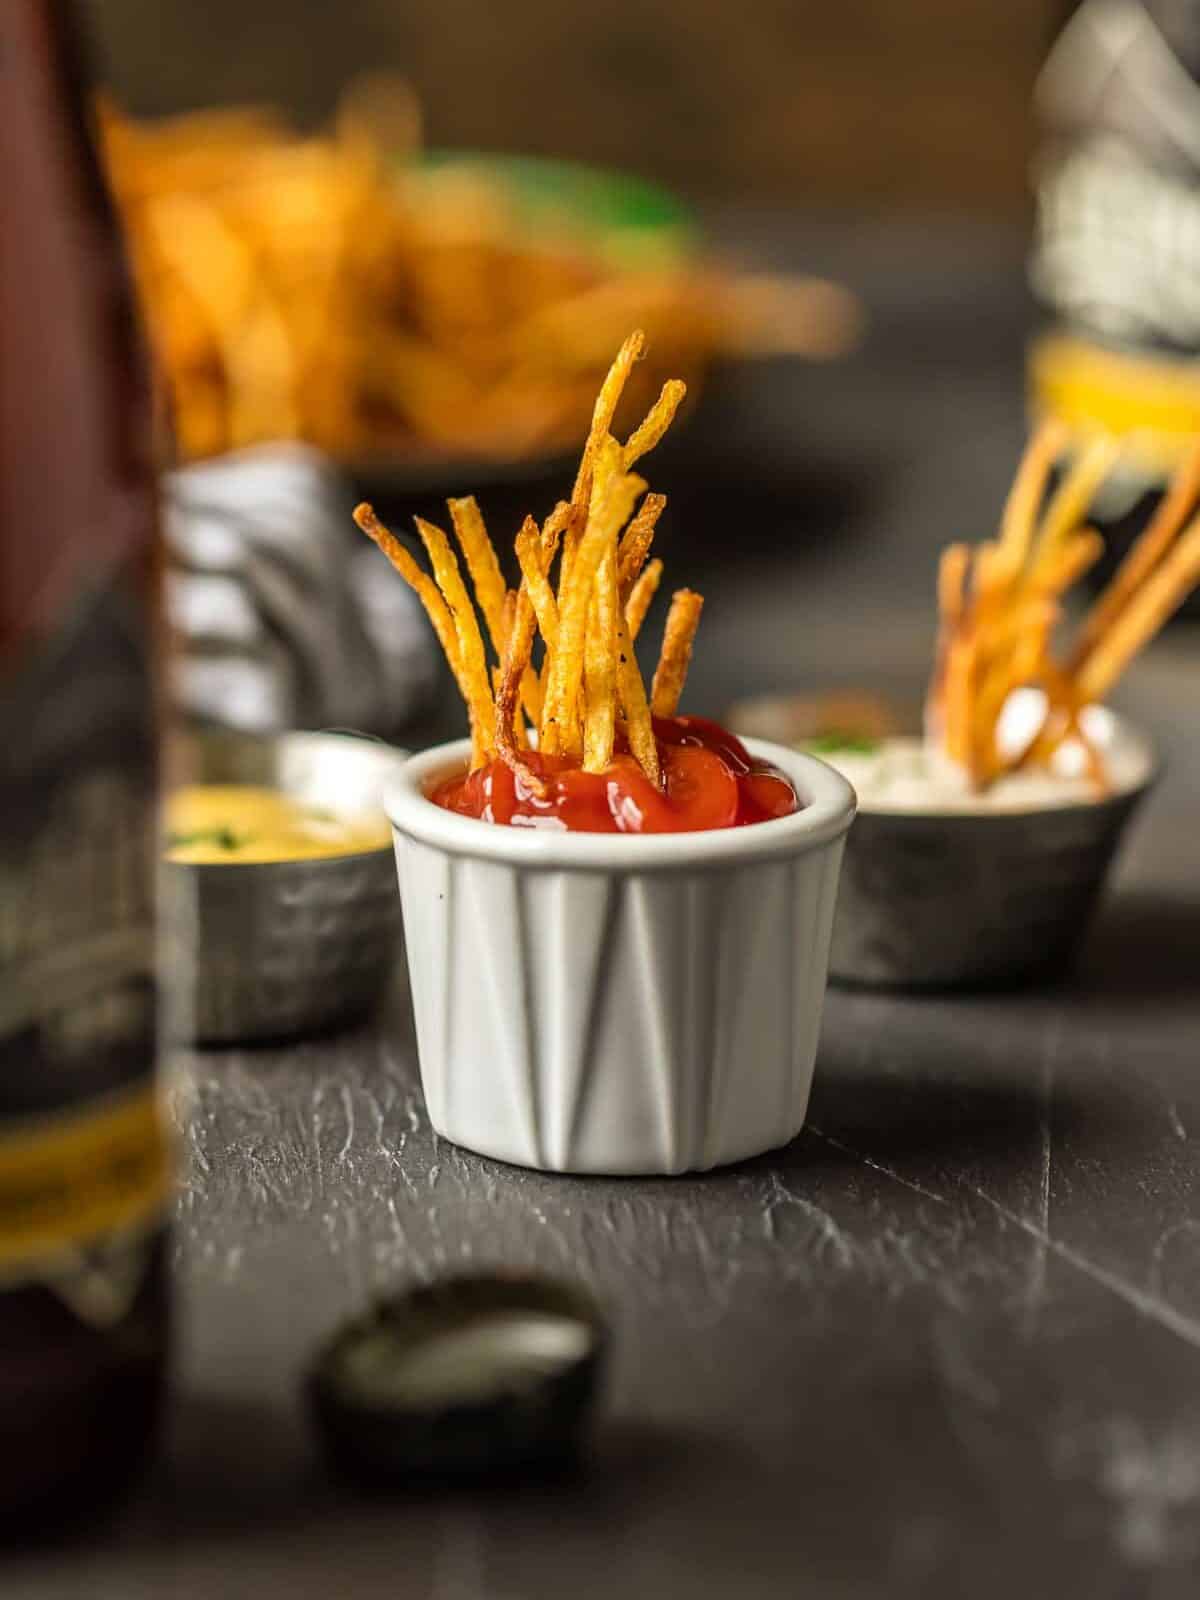 Shoestring Fries dipped in ketchup.